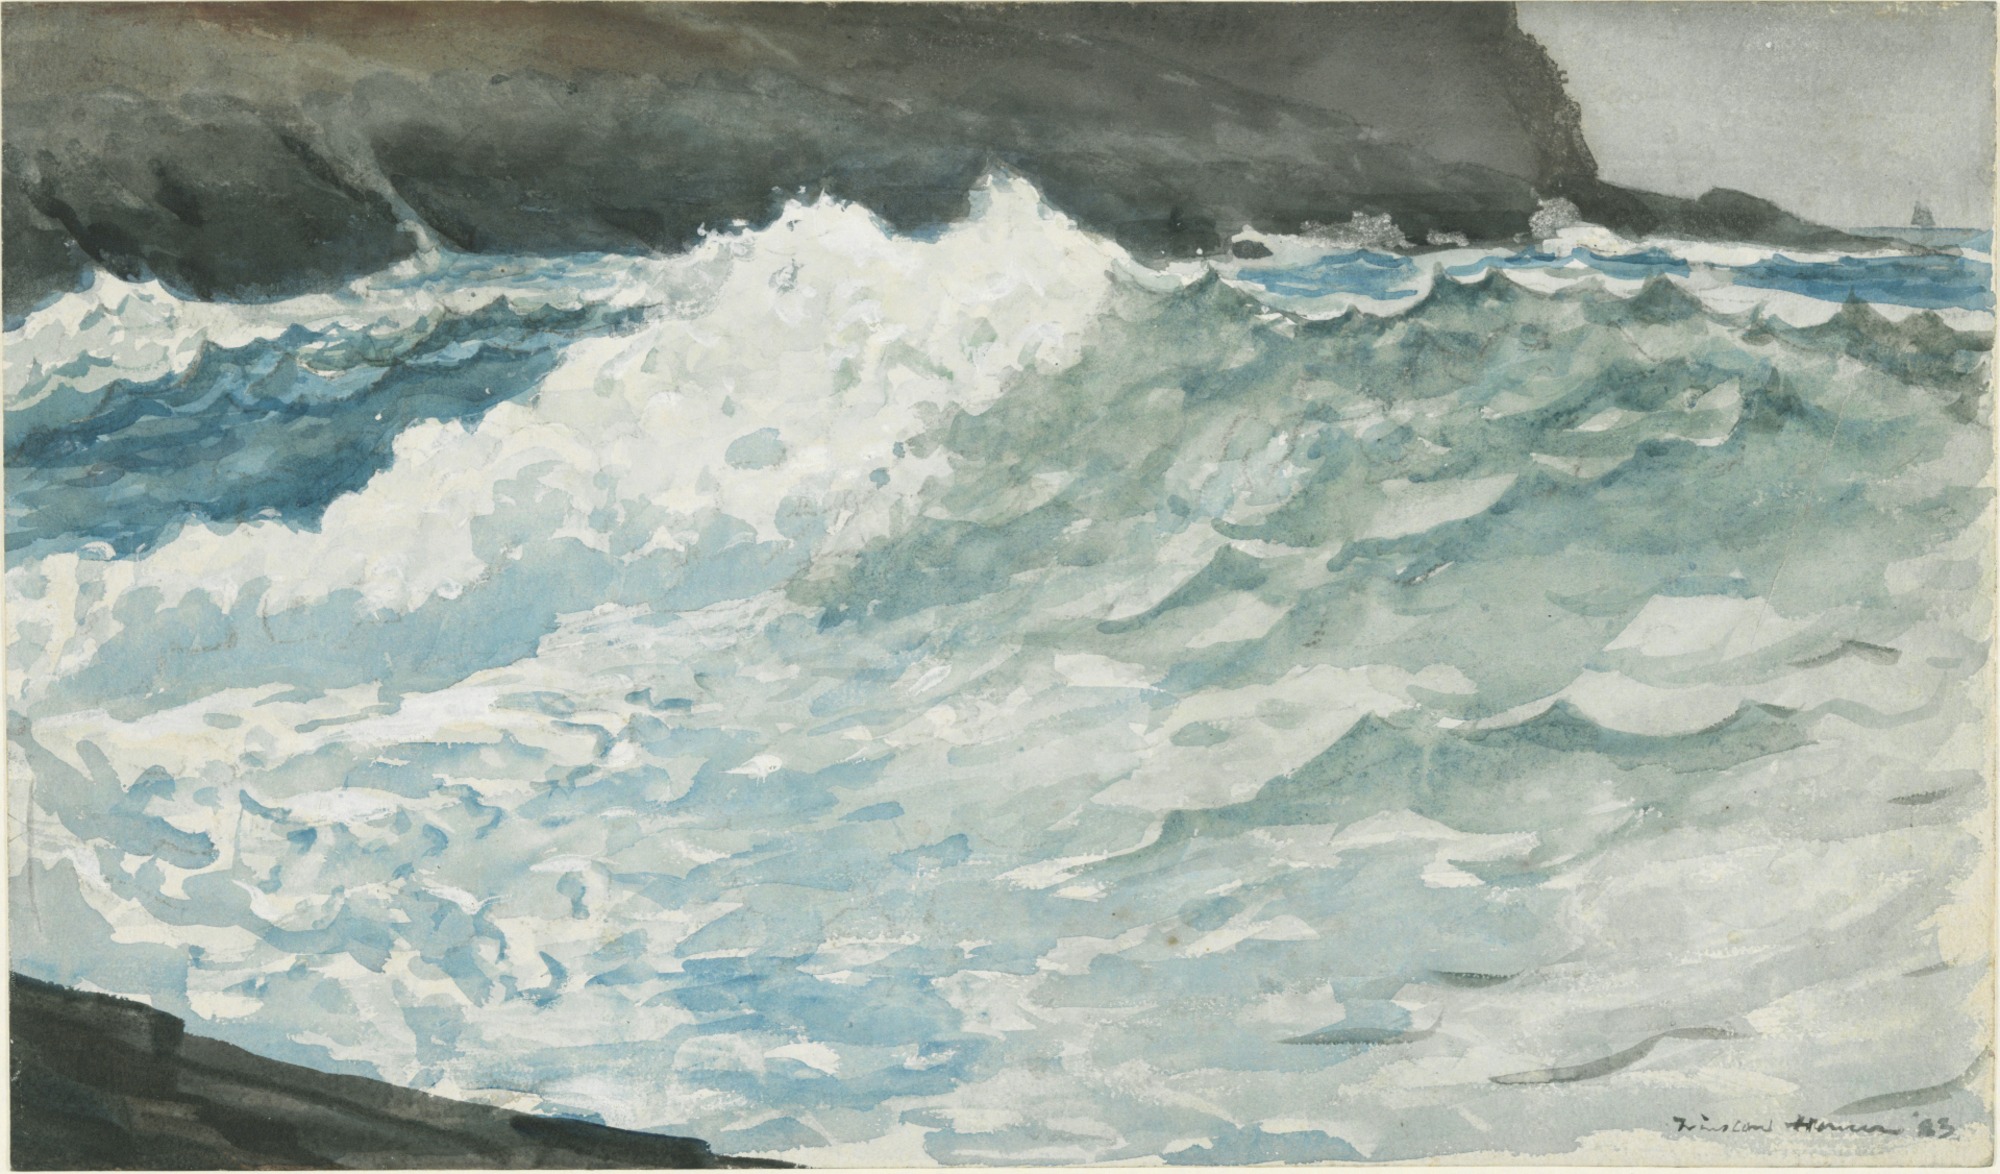 Surf Prout's Neck by Winslow Homer 1883